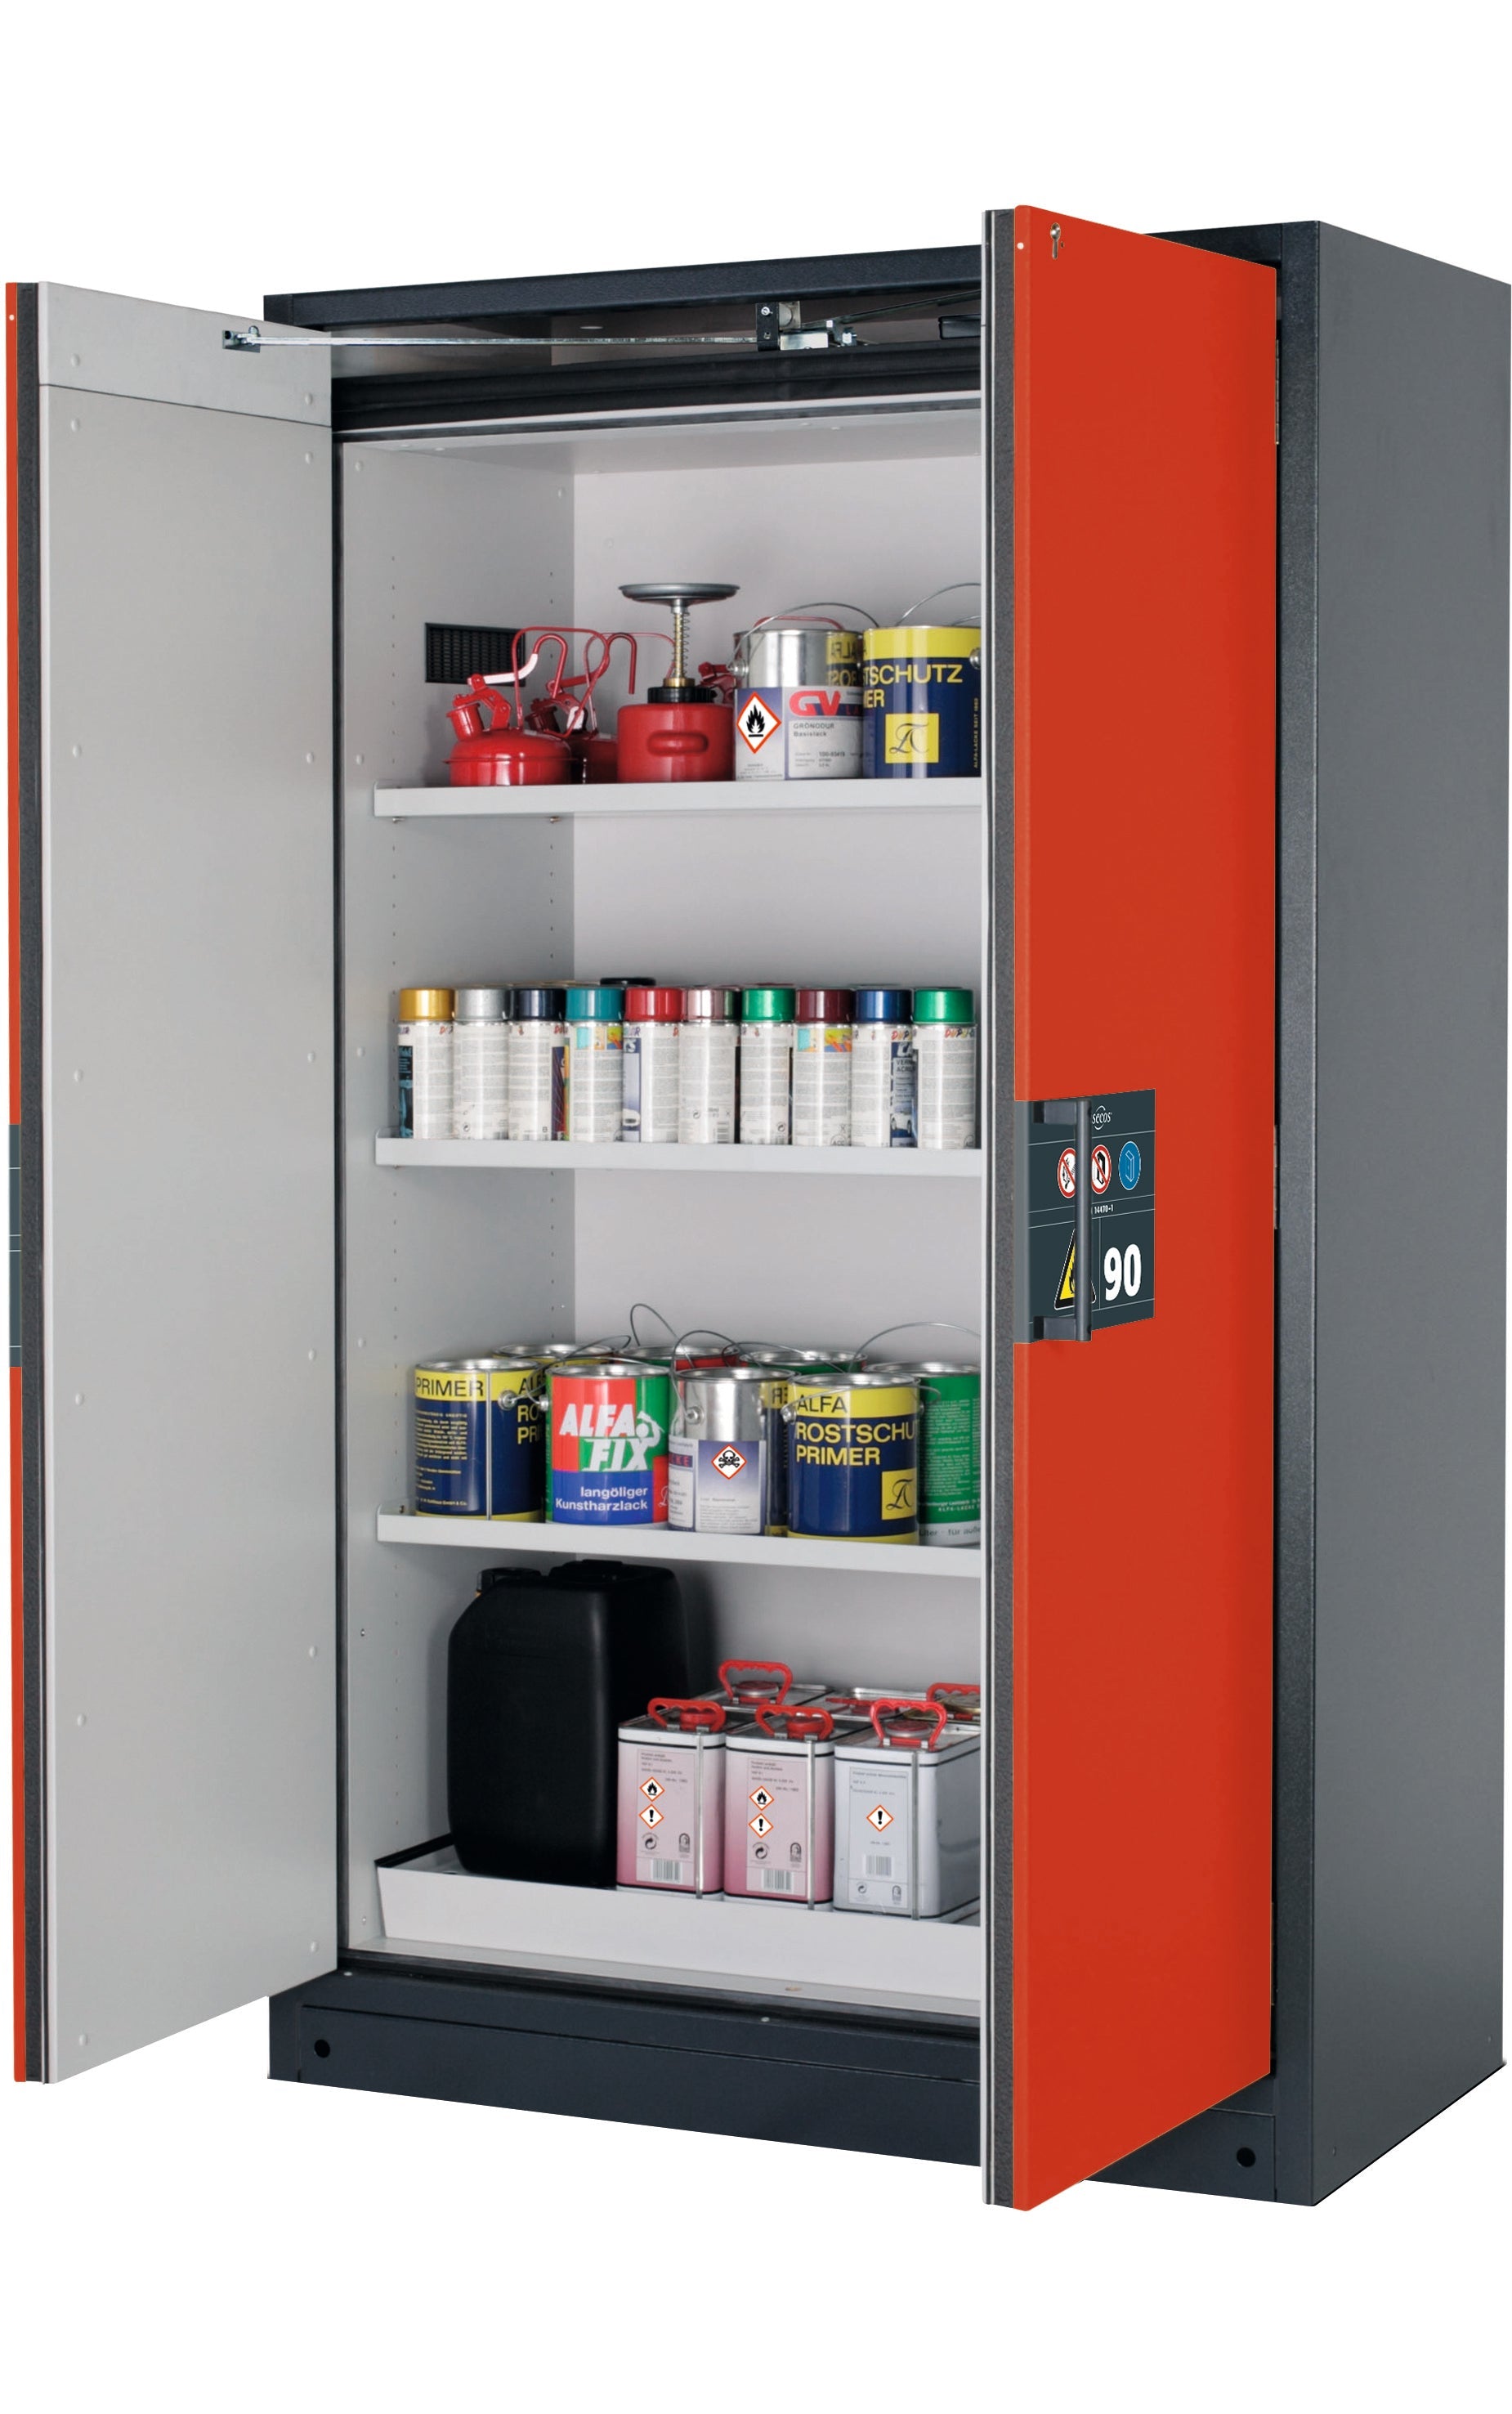 Type 90 safety storage cabinet Q-PEGASUS-90 model Q90.195.120.WDAC in traffic red RAL 3020 with 3x shelf standard (sheet steel),